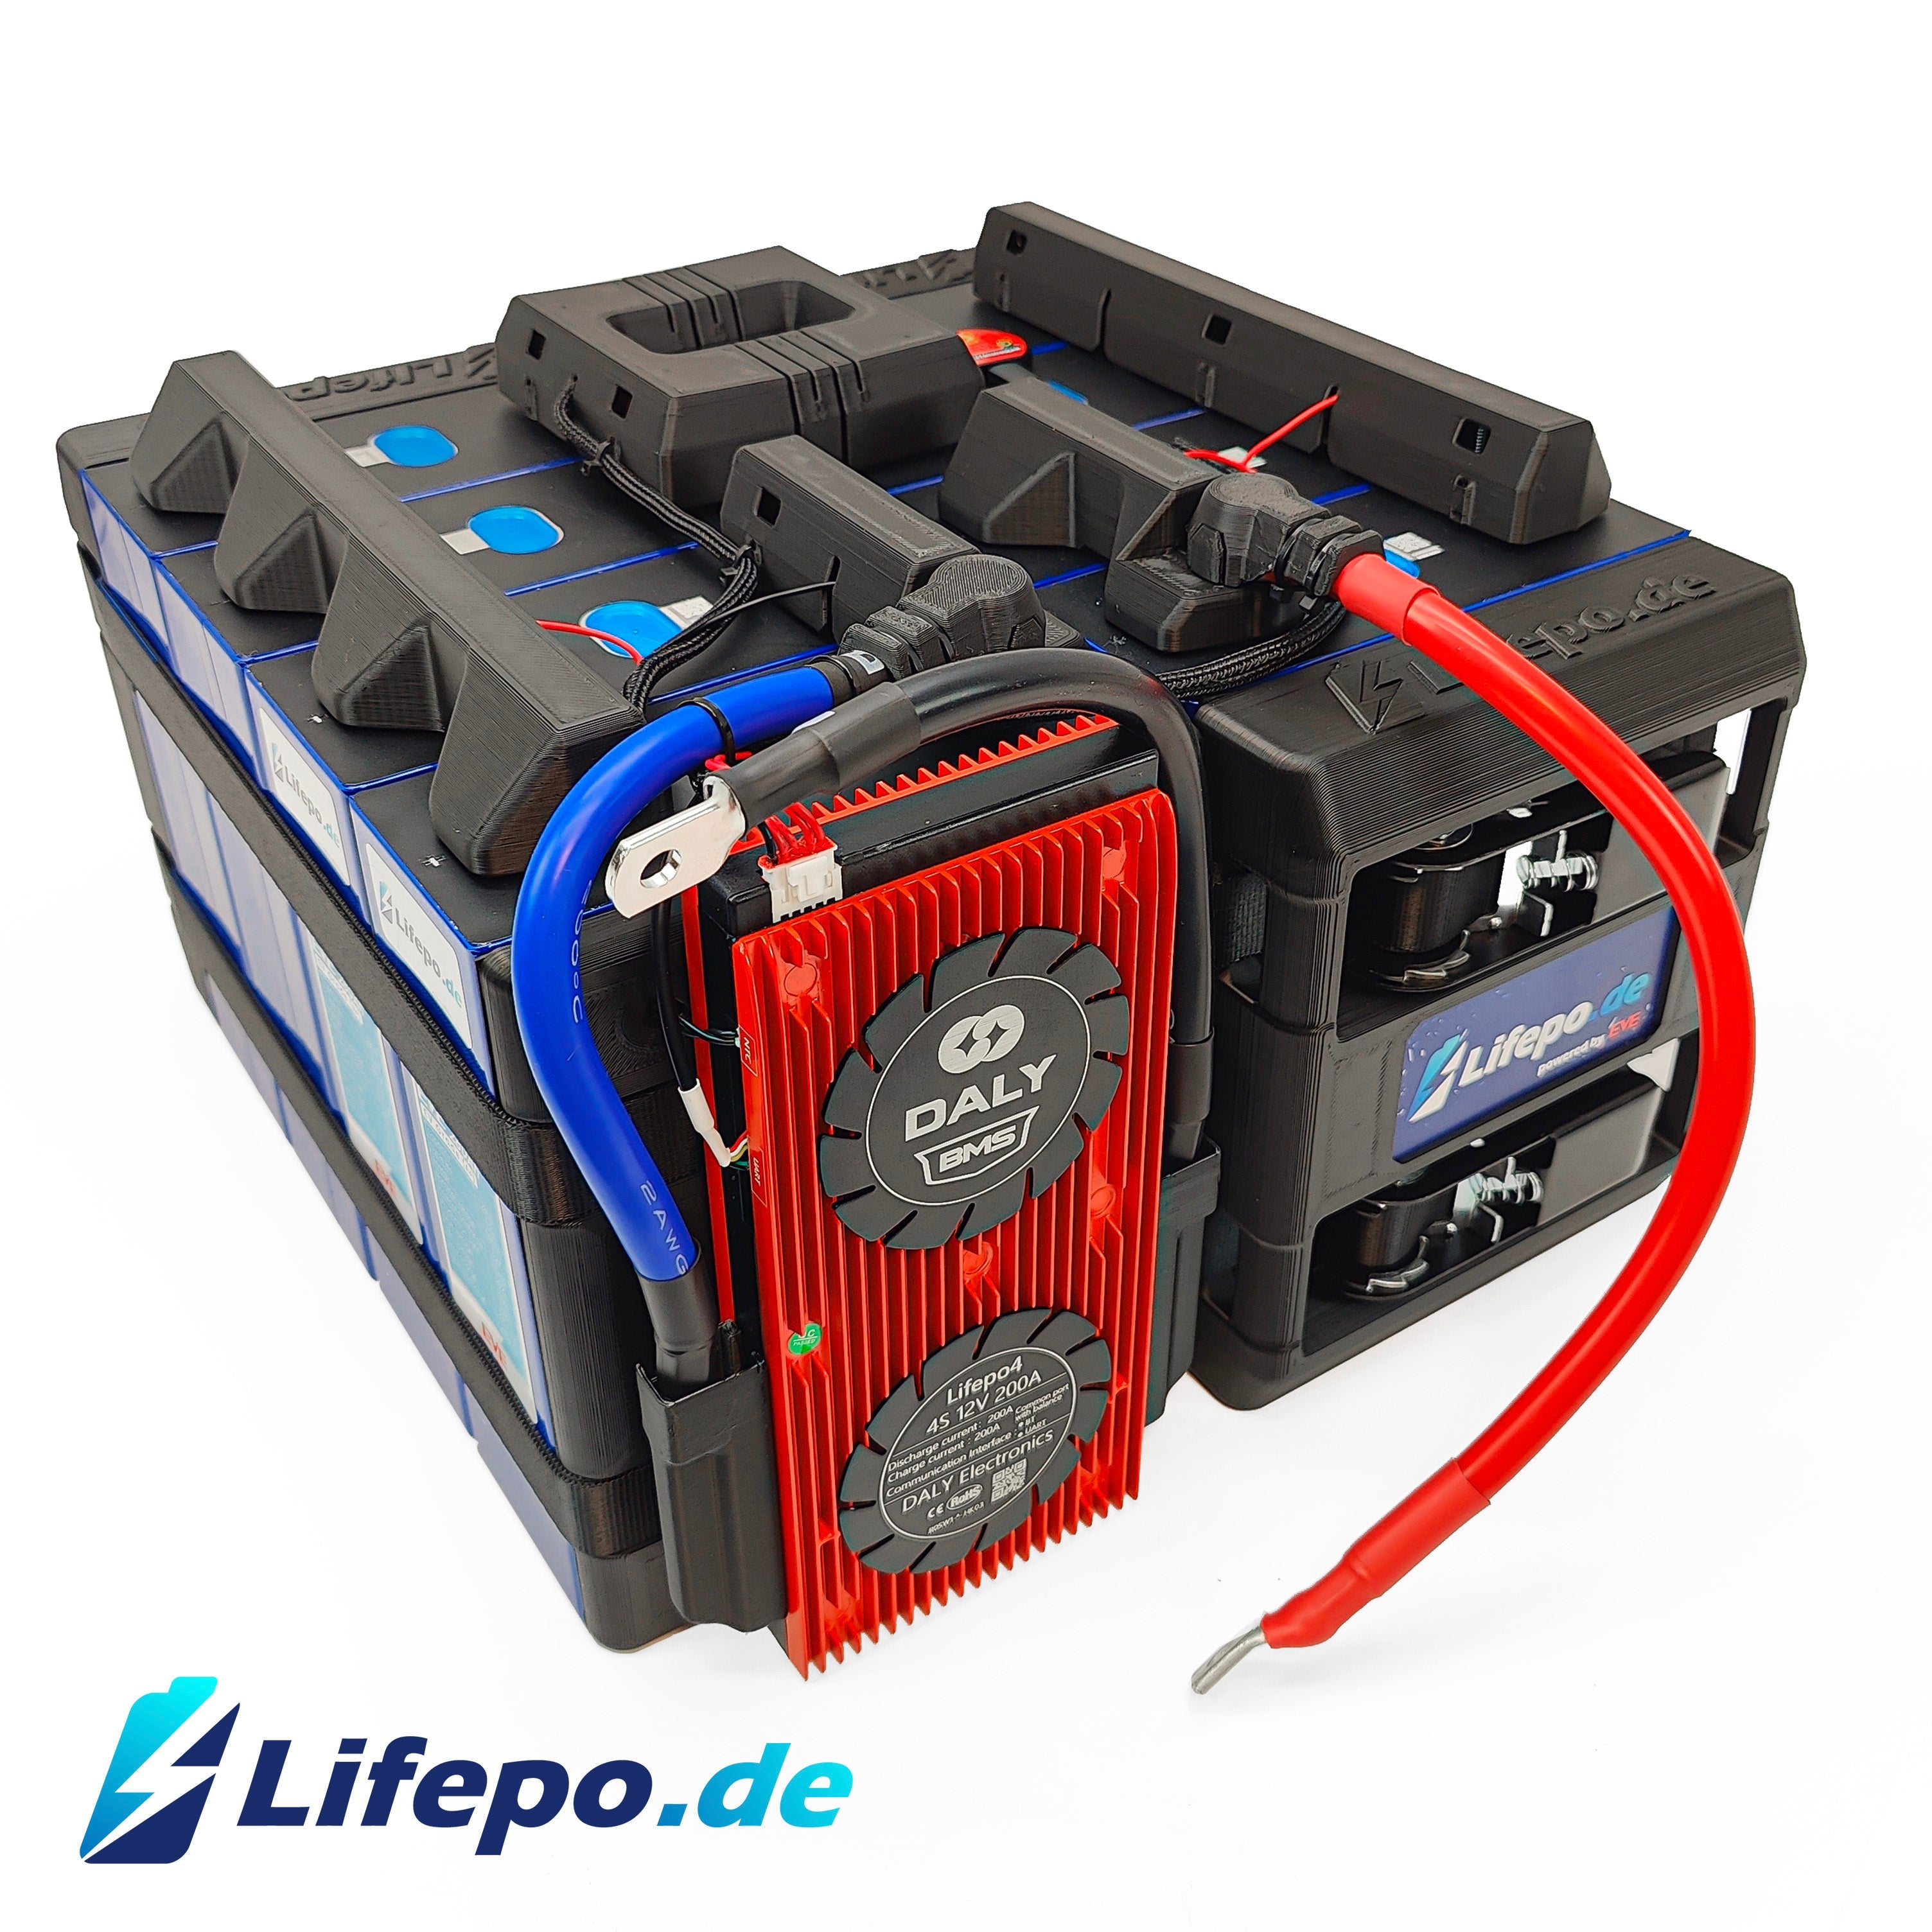 12v 280Ah Lifepo4 battery system with EVE Grade A+ 3.8kWh